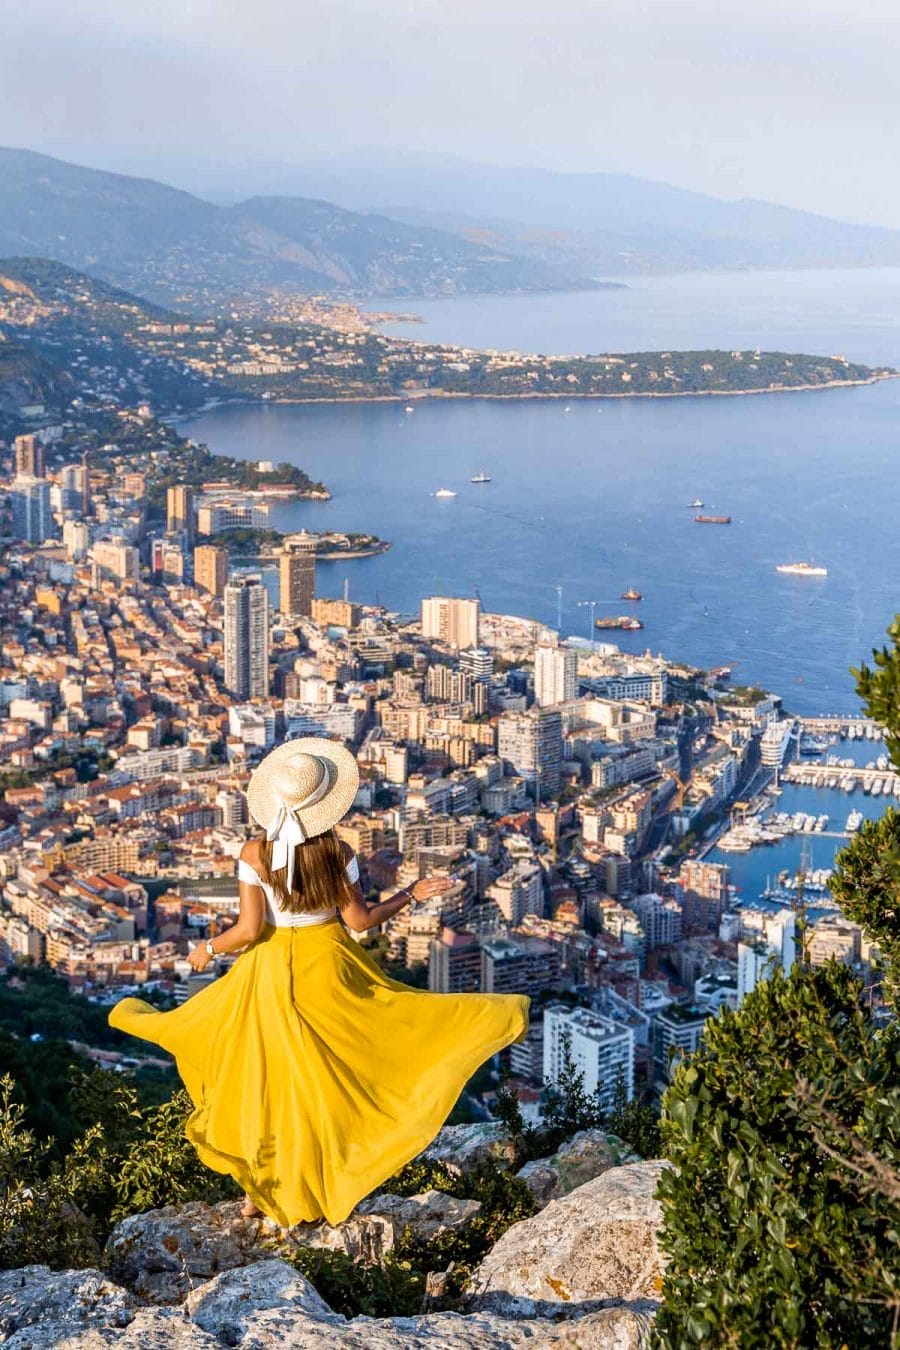 Panoramic view from Tete de Chien with girl in a yellow skirt in the middle